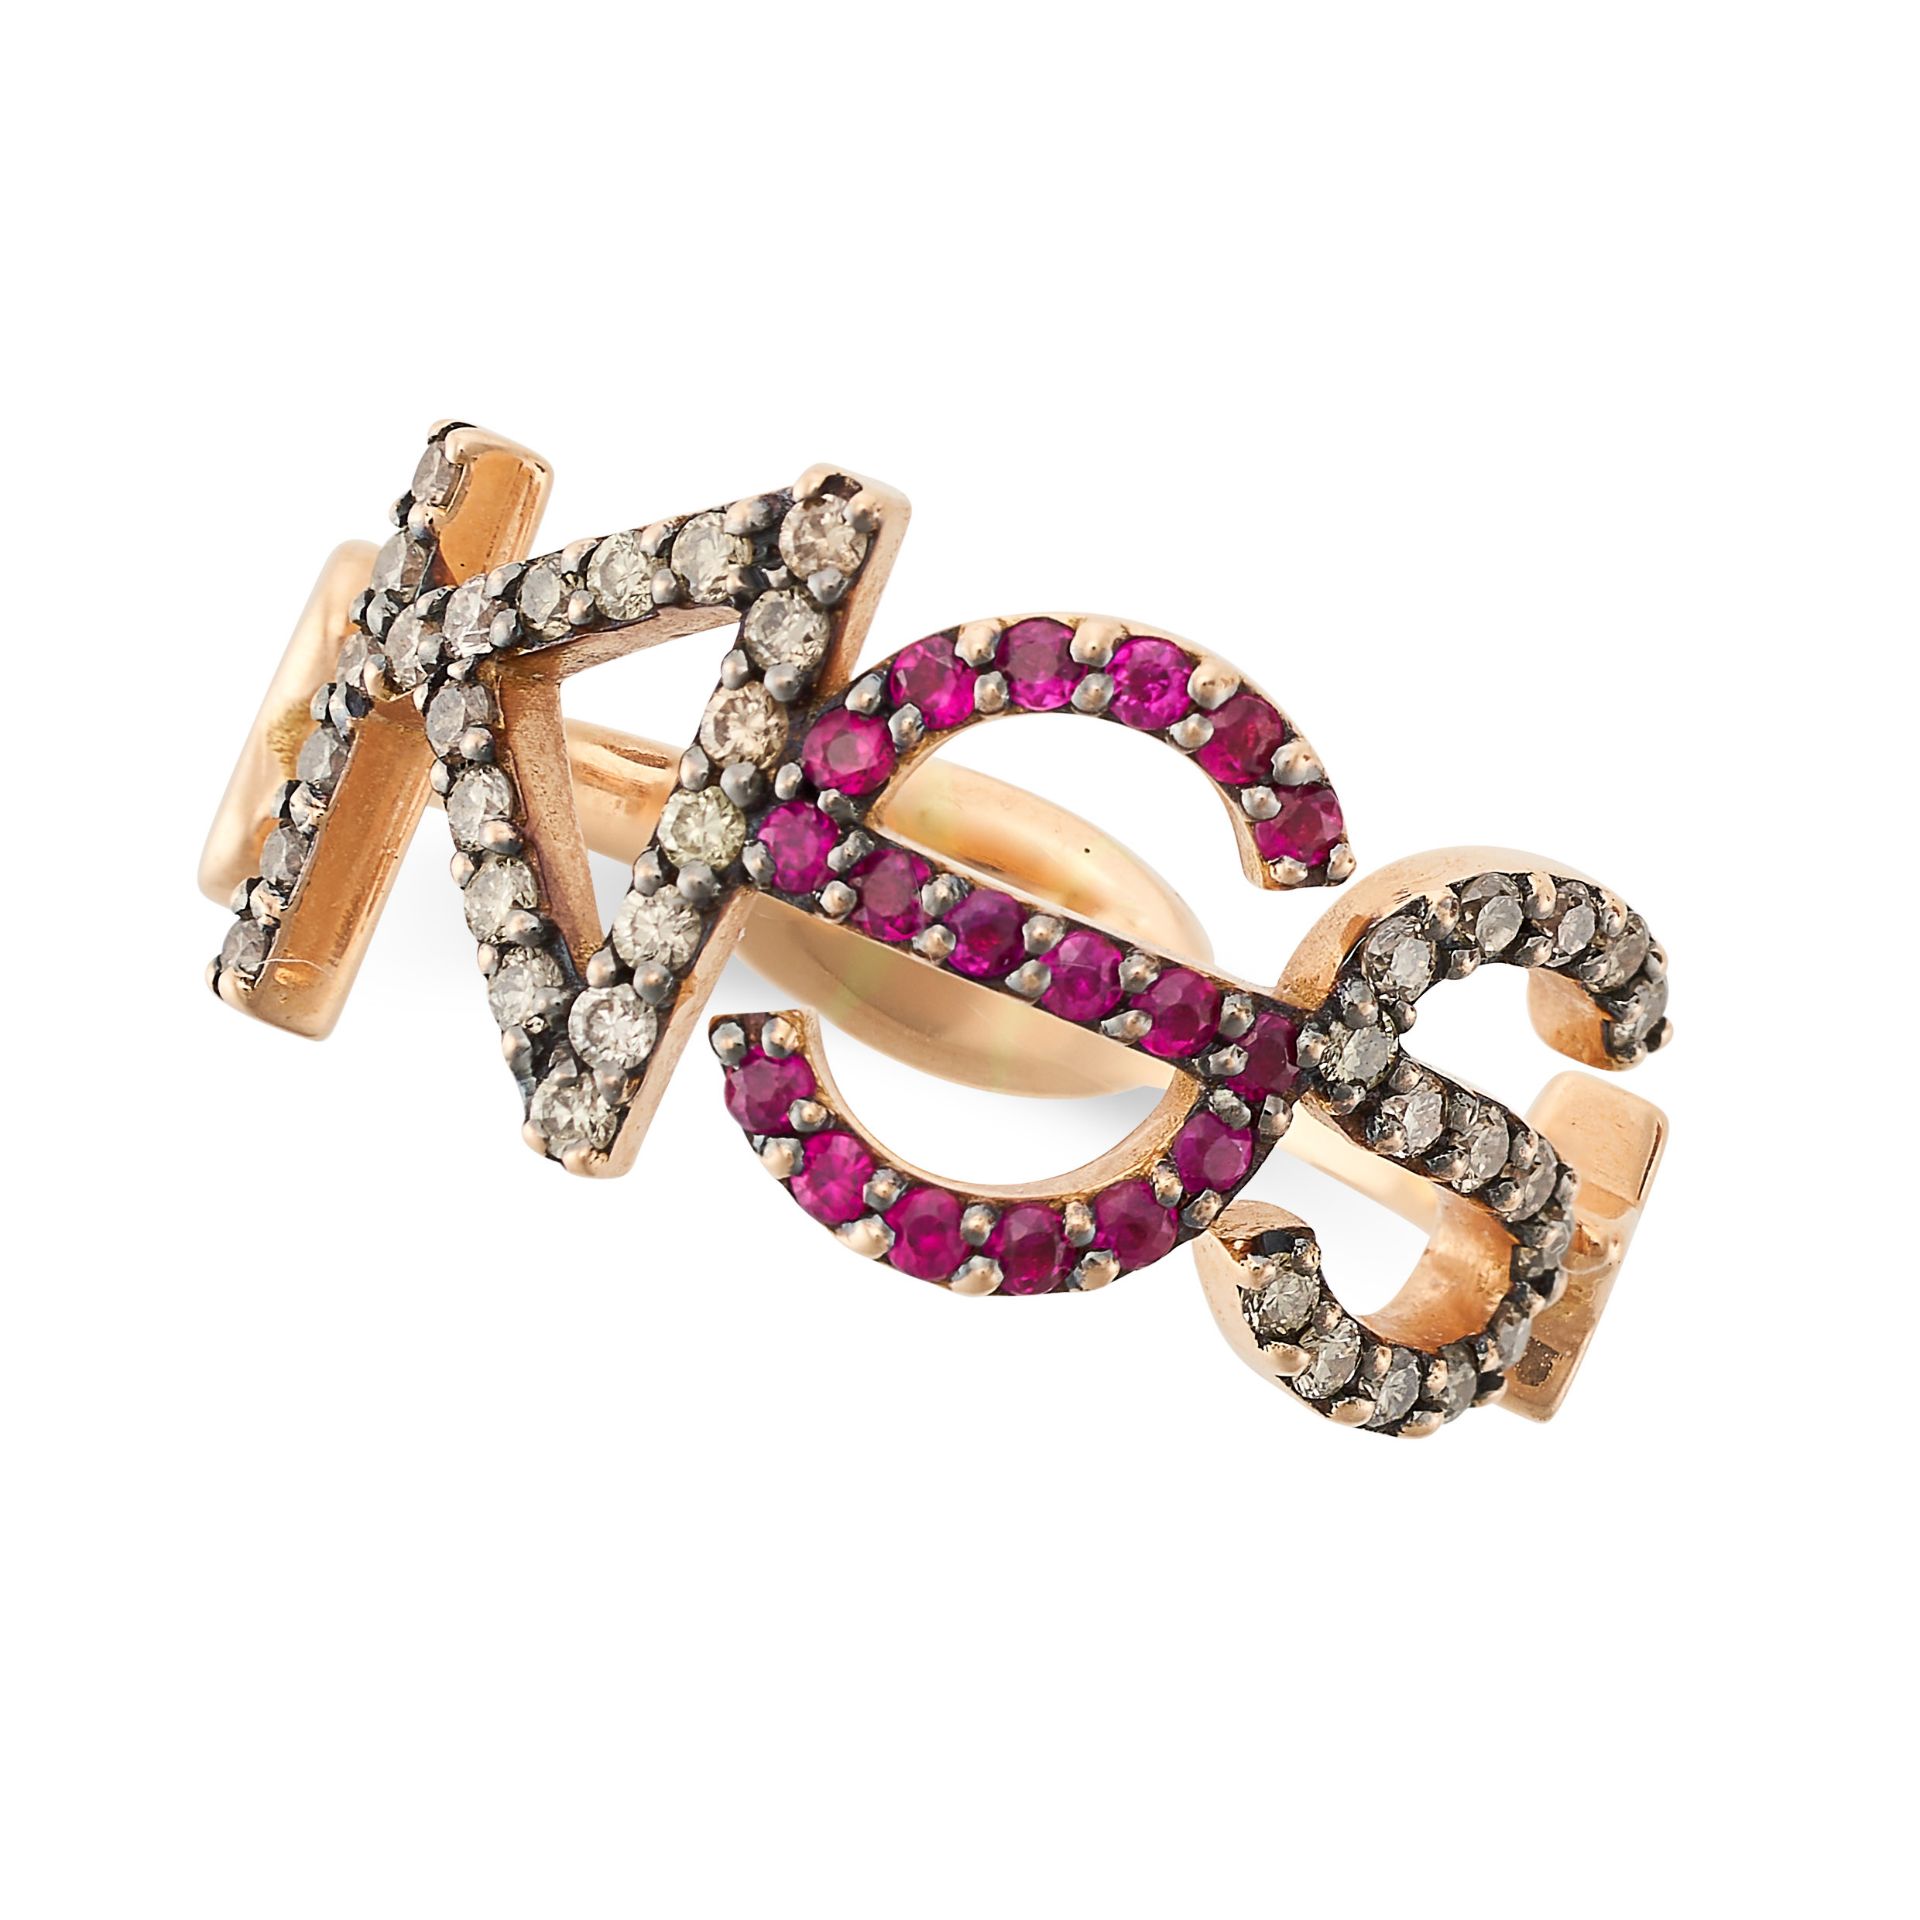 A DIAMOND AND RUBY RING in 18ct yellow gold, stylised as the word KISS set with round brilliant